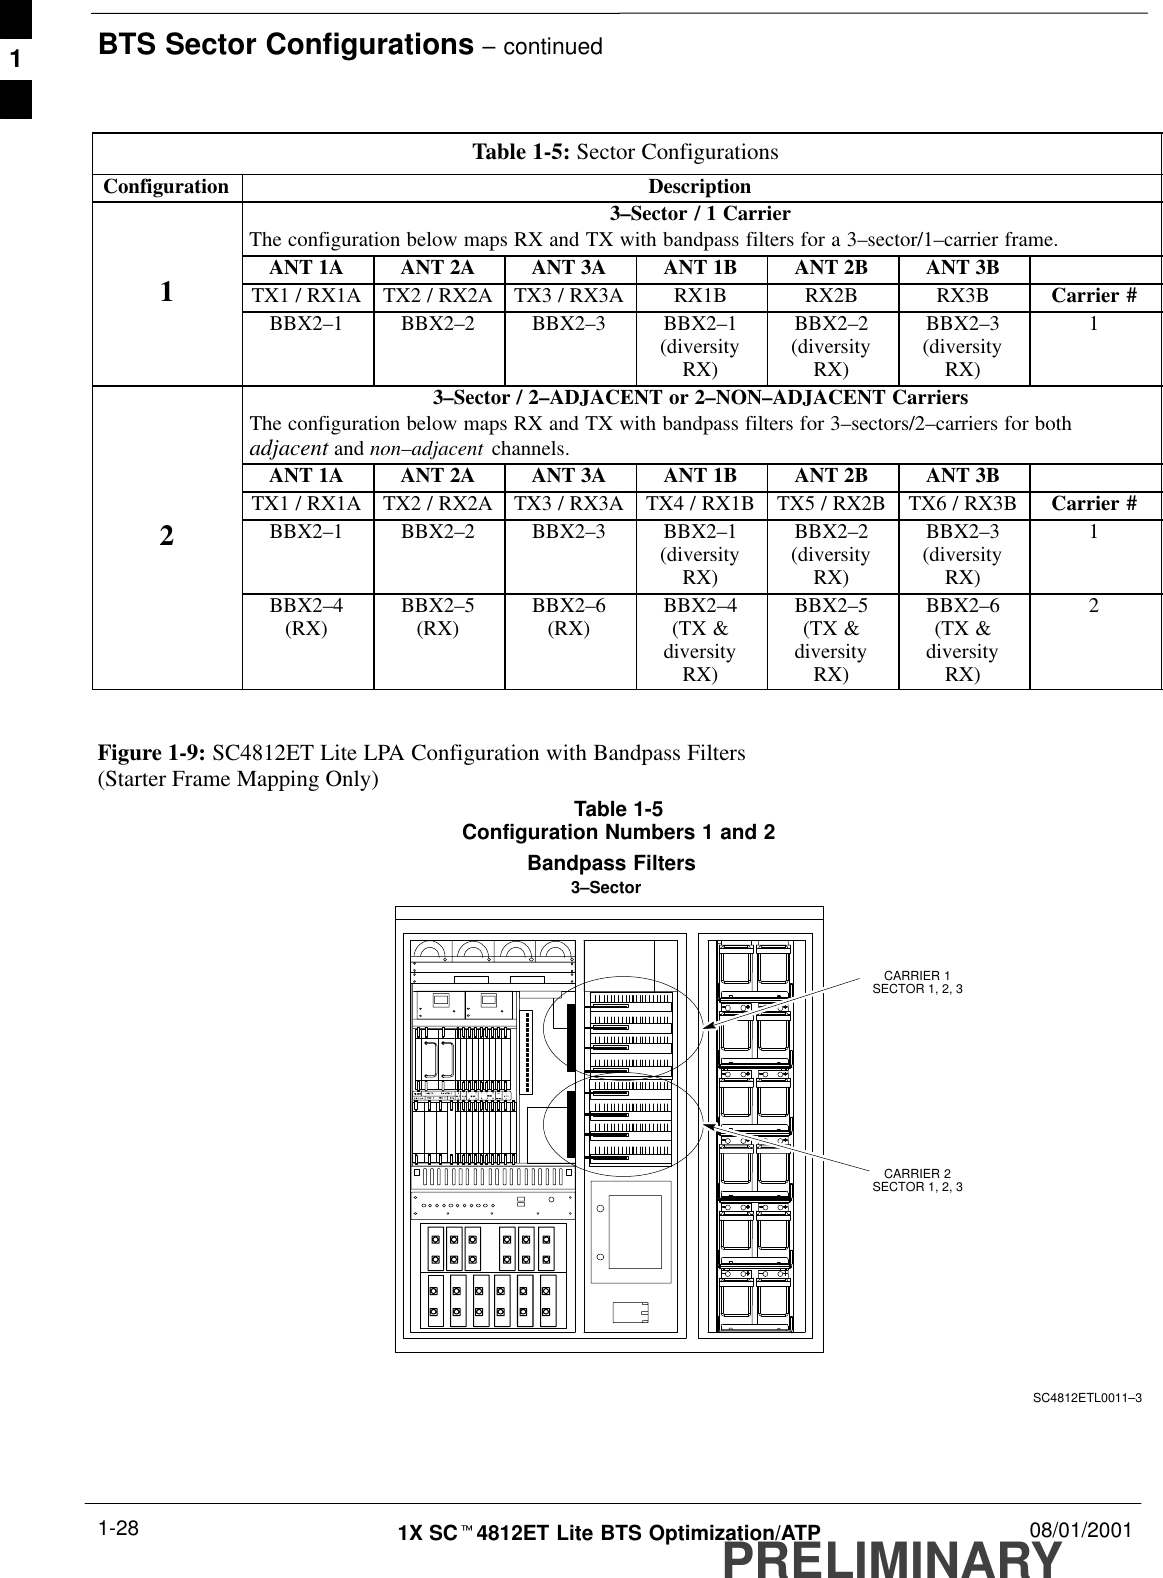 BTS Sector Configurations – continuedPRELIMINARY1X SCt4812ET Lite BTS Optimization/ATP 08/01/20011-28Table 1-5: Sector ConfigurationsConfiguration Description3–Sector / 1 CarrierThe configuration below maps RX and TX with bandpass filters for a 3–sector/1–carrier frame.ANT 1A ANT 2A ANT 3A ANT 1B ANT 2B ANT 3B1TX1 / RX1A TX2 / RX2A TX3 / RX3A RX1B RX2B RX3B Carrier #BBX2–1 BBX2–2 BBX2–3 BBX2–1(diversityRX)BBX2–2(diversityRX)BBX2–3(diversityRX)13–Sector / 2–ADJACENT or 2–NON–ADJACENT CarriersThe configuration below maps RX and TX with bandpass filters for 3–sectors/2–carriers for bothadjacent and non–adjacent channels.ANT 1A ANT 2A ANT 3A ANT 1B ANT 2B ANT 3BTX1 / RX1A TX2 / RX2A TX3 / RX3A TX4 / RX1B TX5 / RX2B TX6 / RX3B Carrier #2BBX2–1 BBX2–2 BBX2–3 BBX2–1(diversityRX)BBX2–2(diversityRX)BBX2–3(diversityRX)1BBX2–4(RX) BBX2–5(RX) BBX2–6(RX) BBX2–4(TX &amp;diversityRX)BBX2–5(TX &amp;diversityRX)BBX2–6(TX &amp;diversityRX)2Figure 1-9: SC4812ET Lite LPA Configuration with Bandpass Filters(Starter Frame Mapping Only)Table 1-5Configuration Numbers 1 and 23–SectorBandpass FiltersCARRIER 1SECTOR 1, 2, 3CARRIER 2SECTOR 1, 2, 3SC4812ETL0011–31